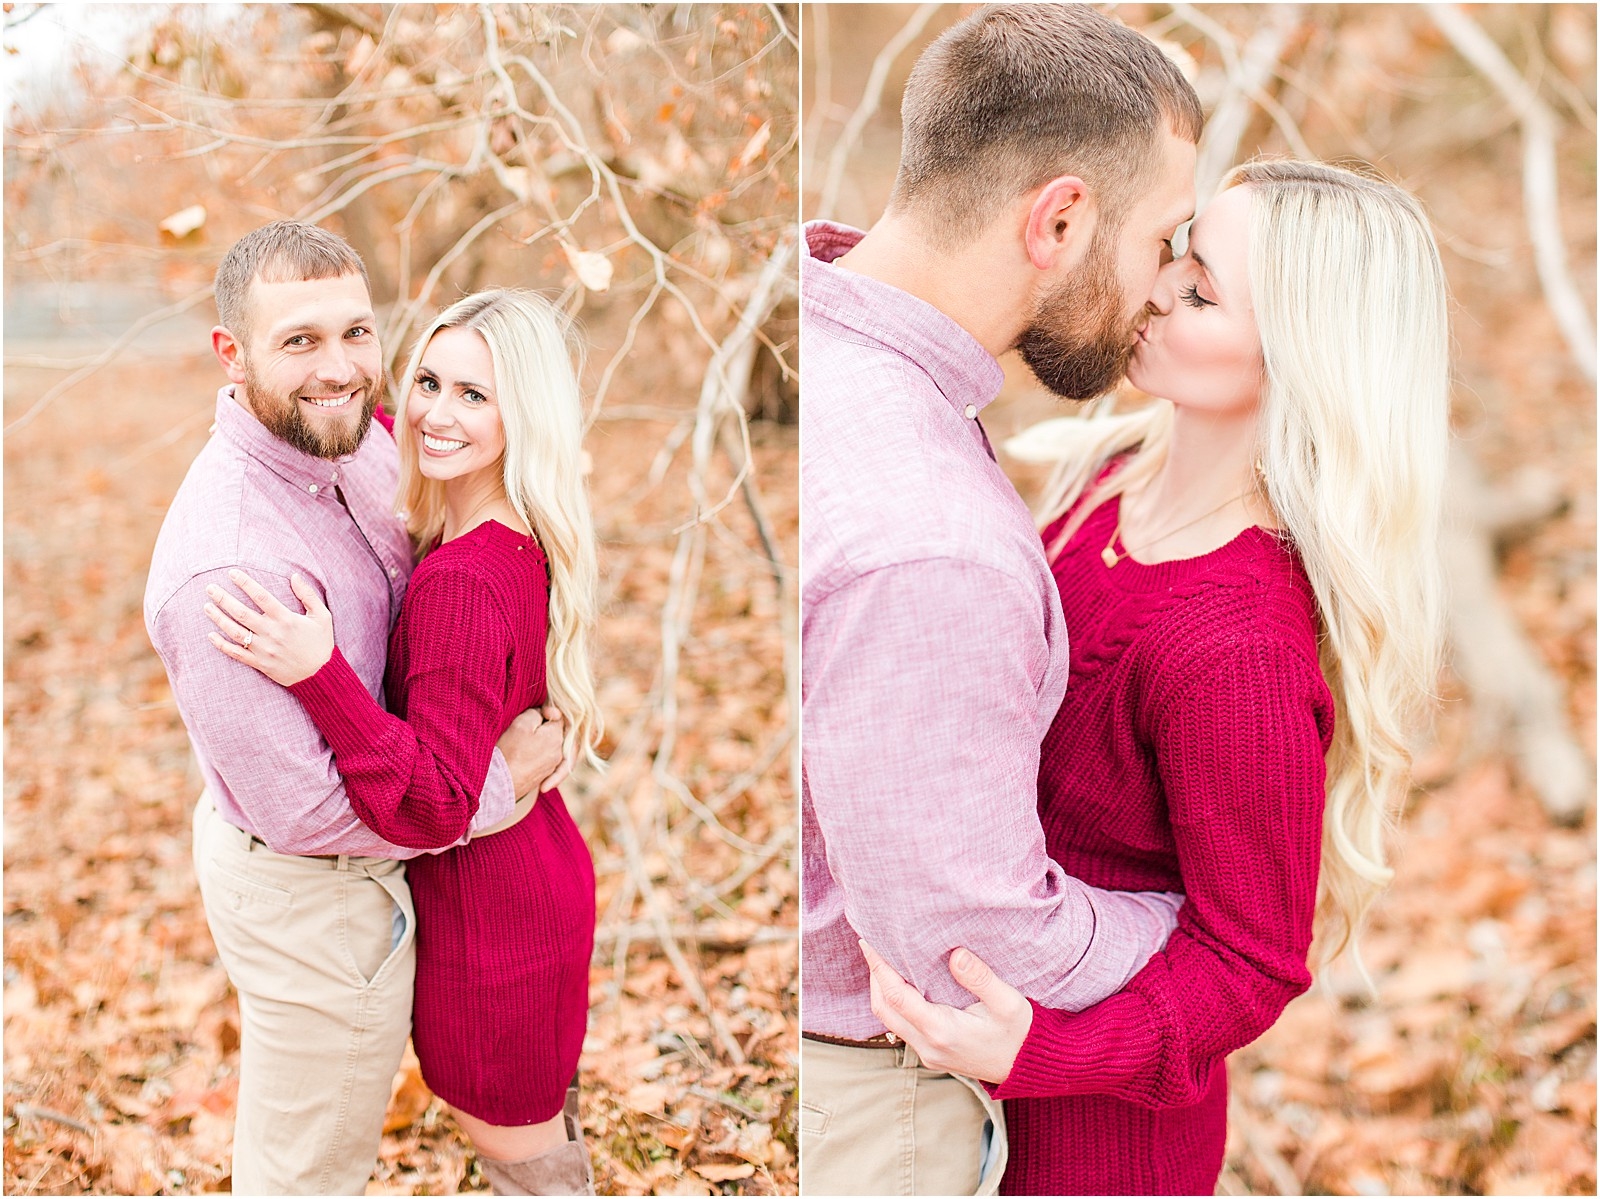 An sweet and snuggly fall anniversary session in Loogootee, Indiana. | #anniversarysession #fallsession #southernindianawedding | 019.jpg